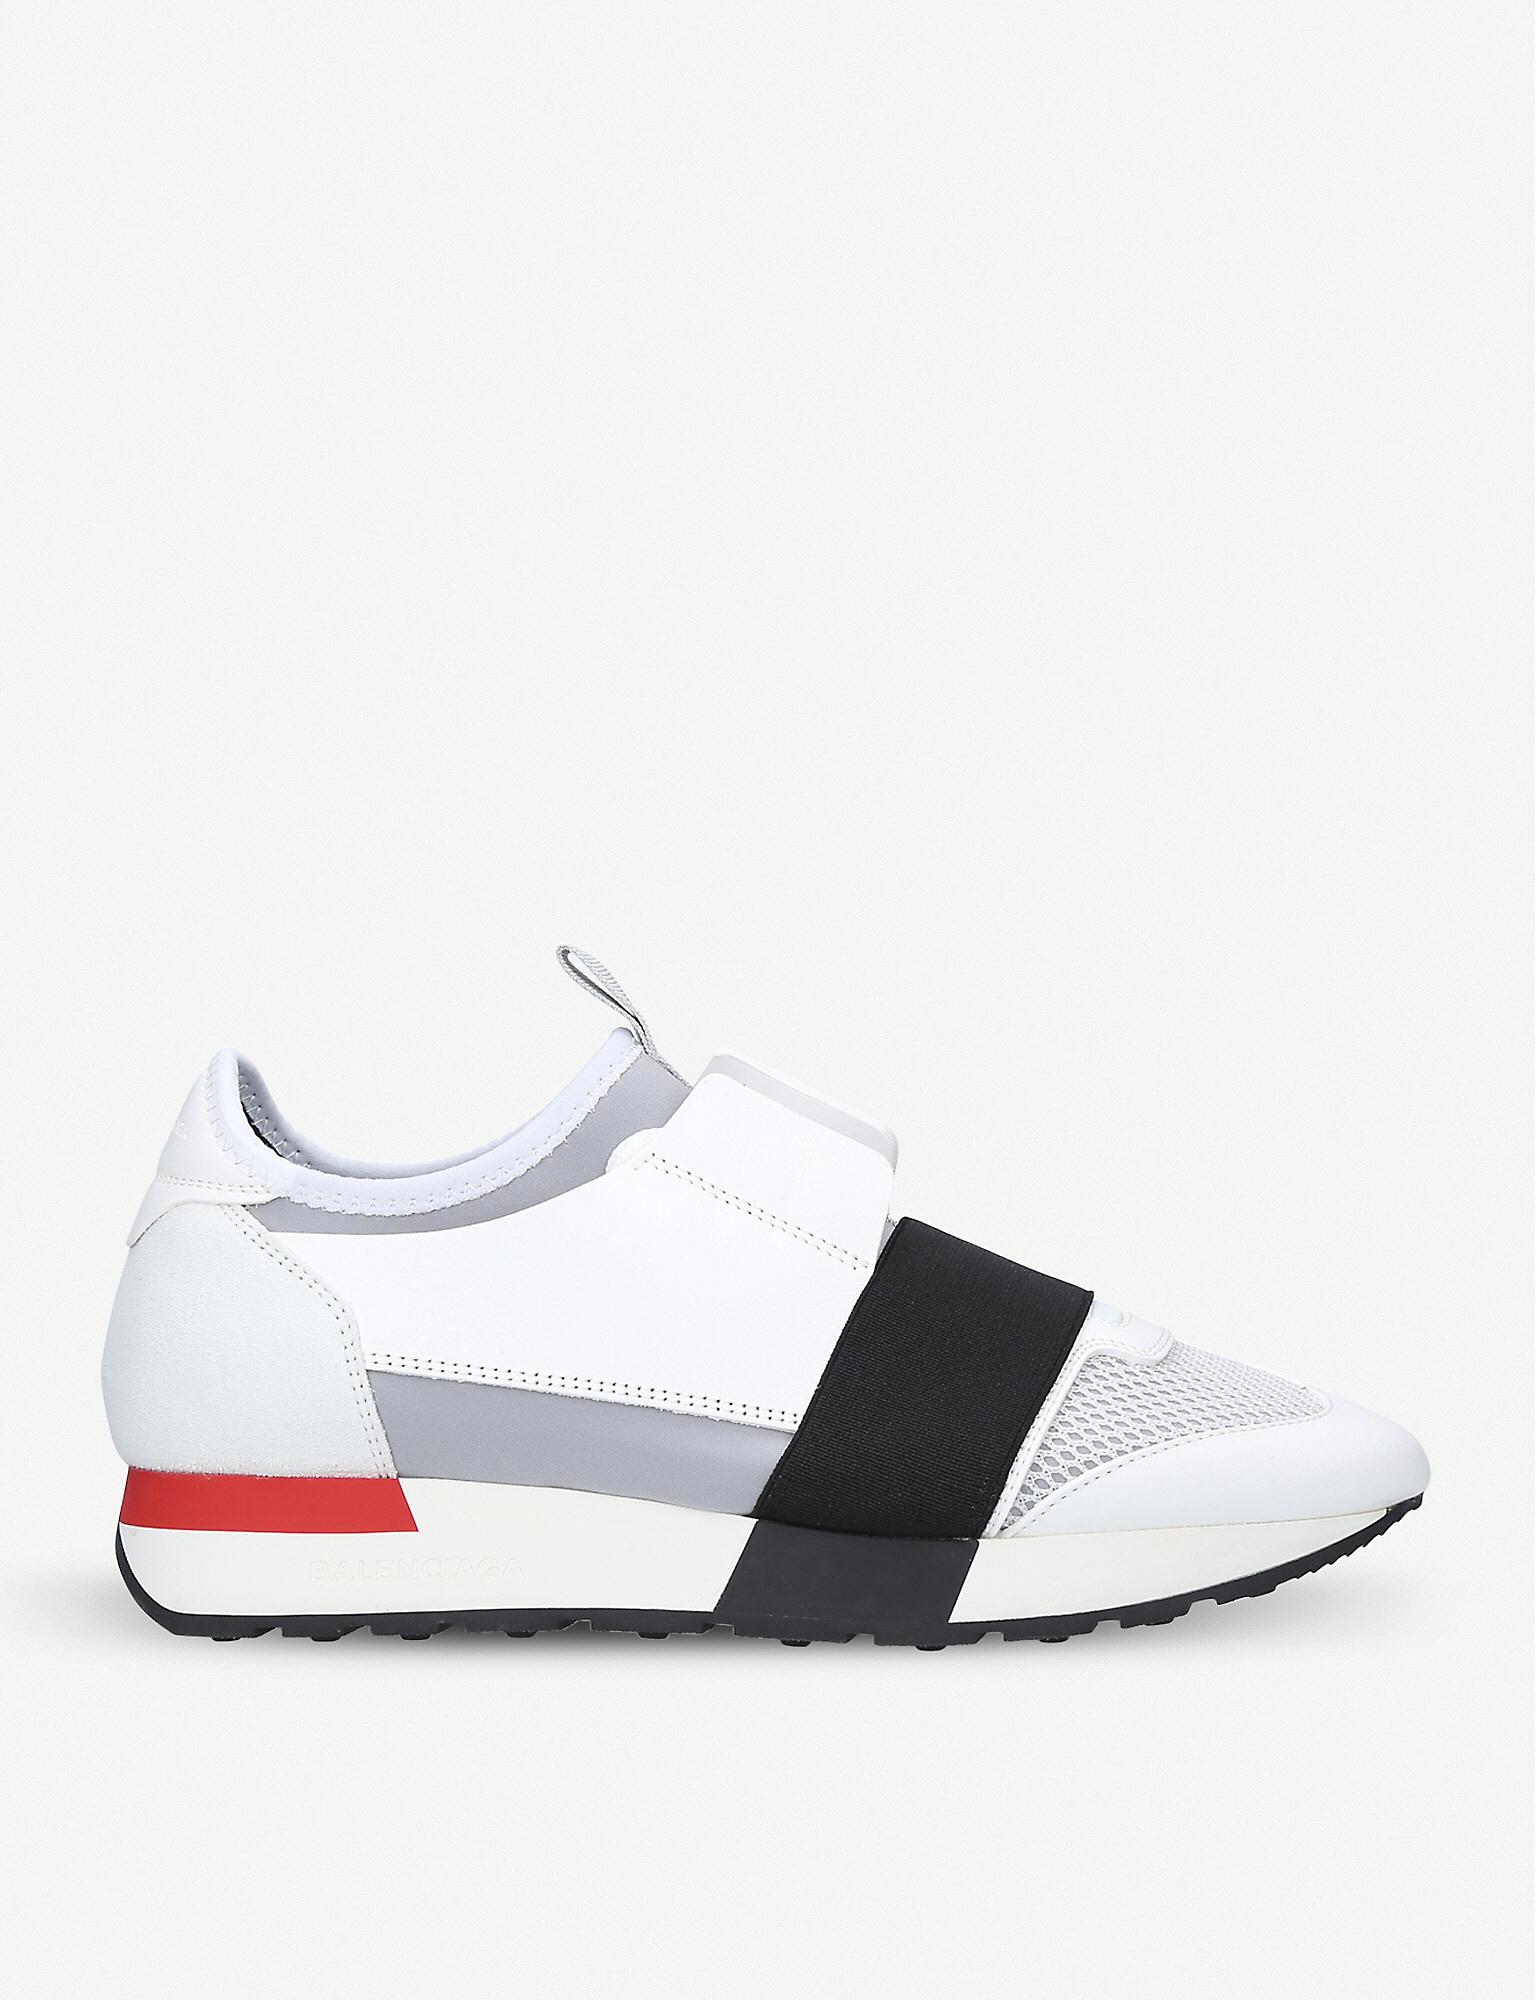 Balenciaga Neoprene Race Runners Mesh, Leather And Knitted Low-top Trainers  in White - Save 60% - Lyst